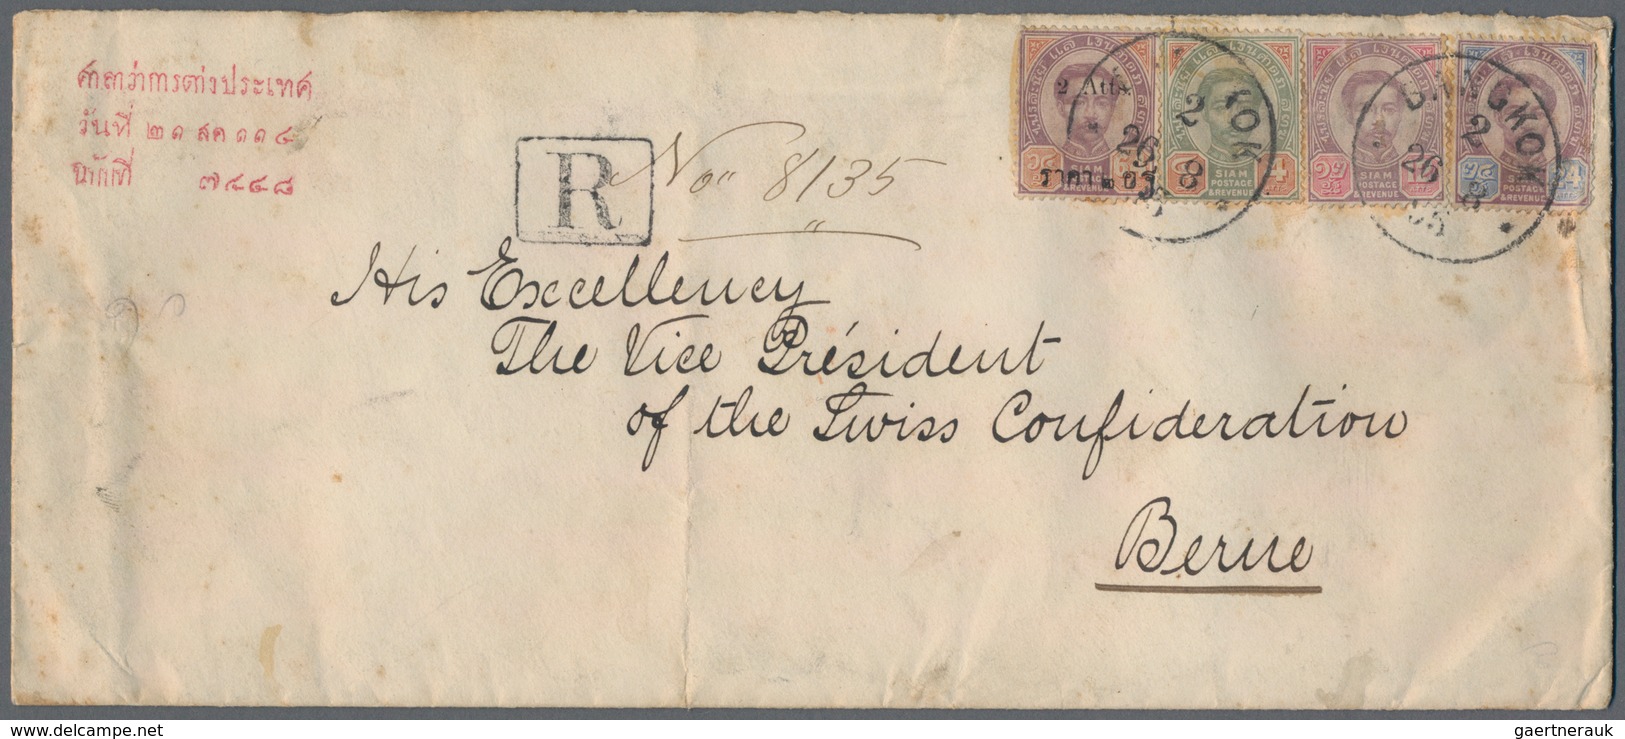 Thailand: 1895, Printed Palace Envelope (Royal Coat Of Arms On Back) Sent Registered To "The Vice Pr - Thailand